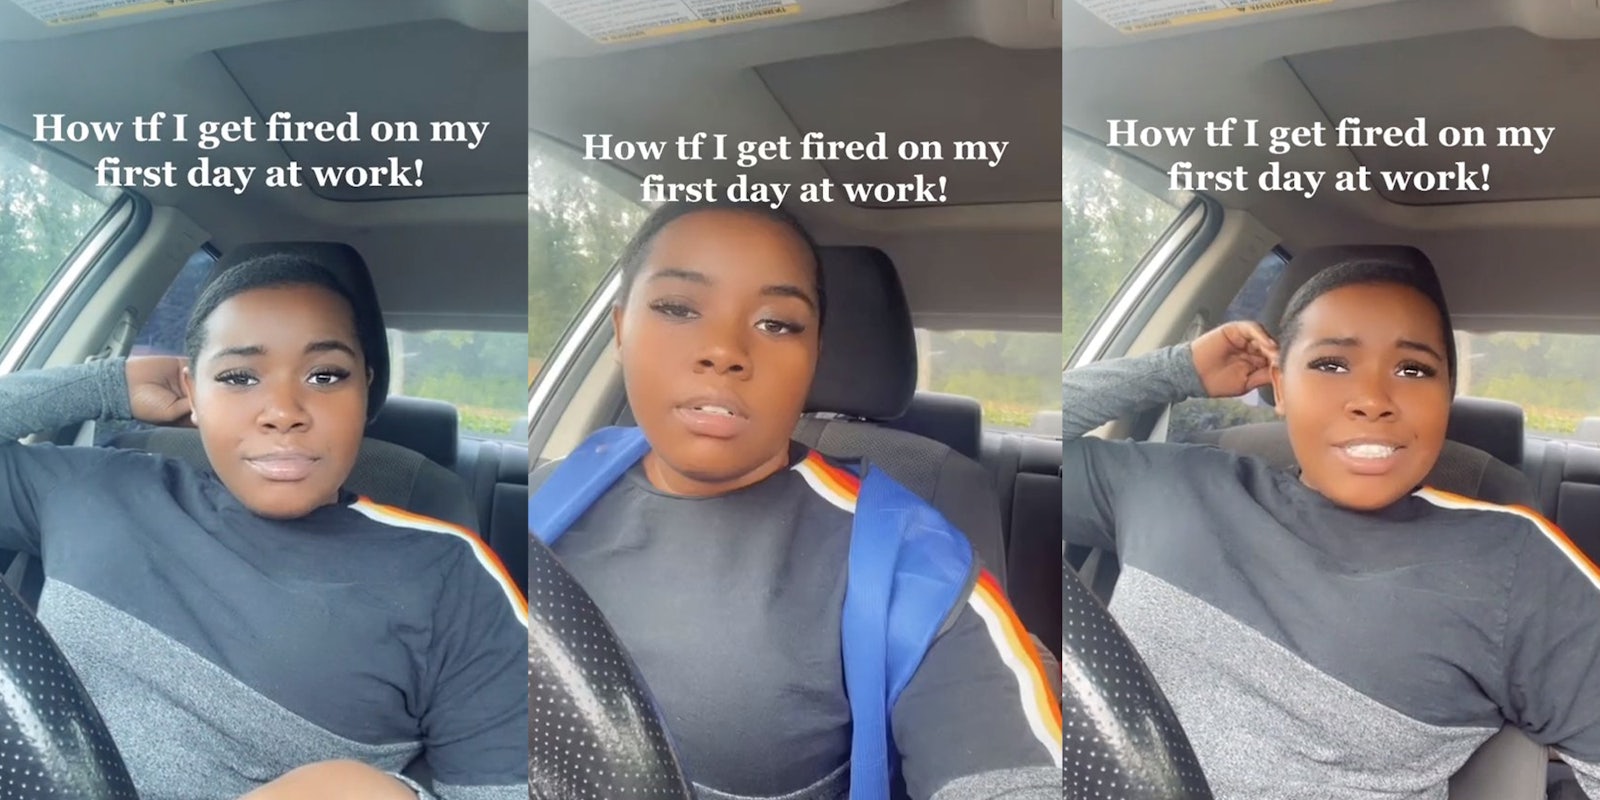 Airport employee says she got fired on her first day on the job